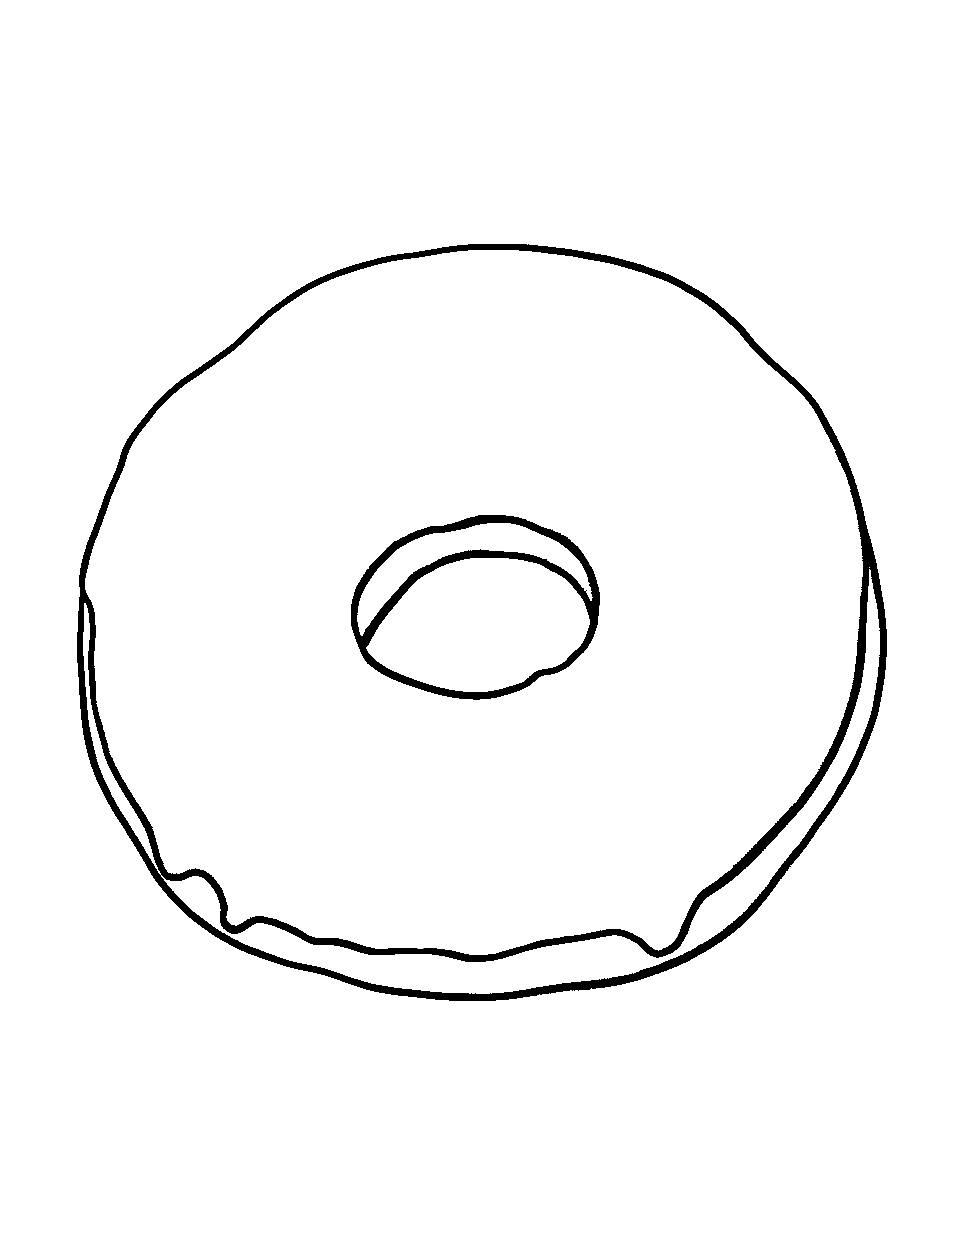 Simple Glazed Donut Coloring Page - A simple drawing of a glazed donut.